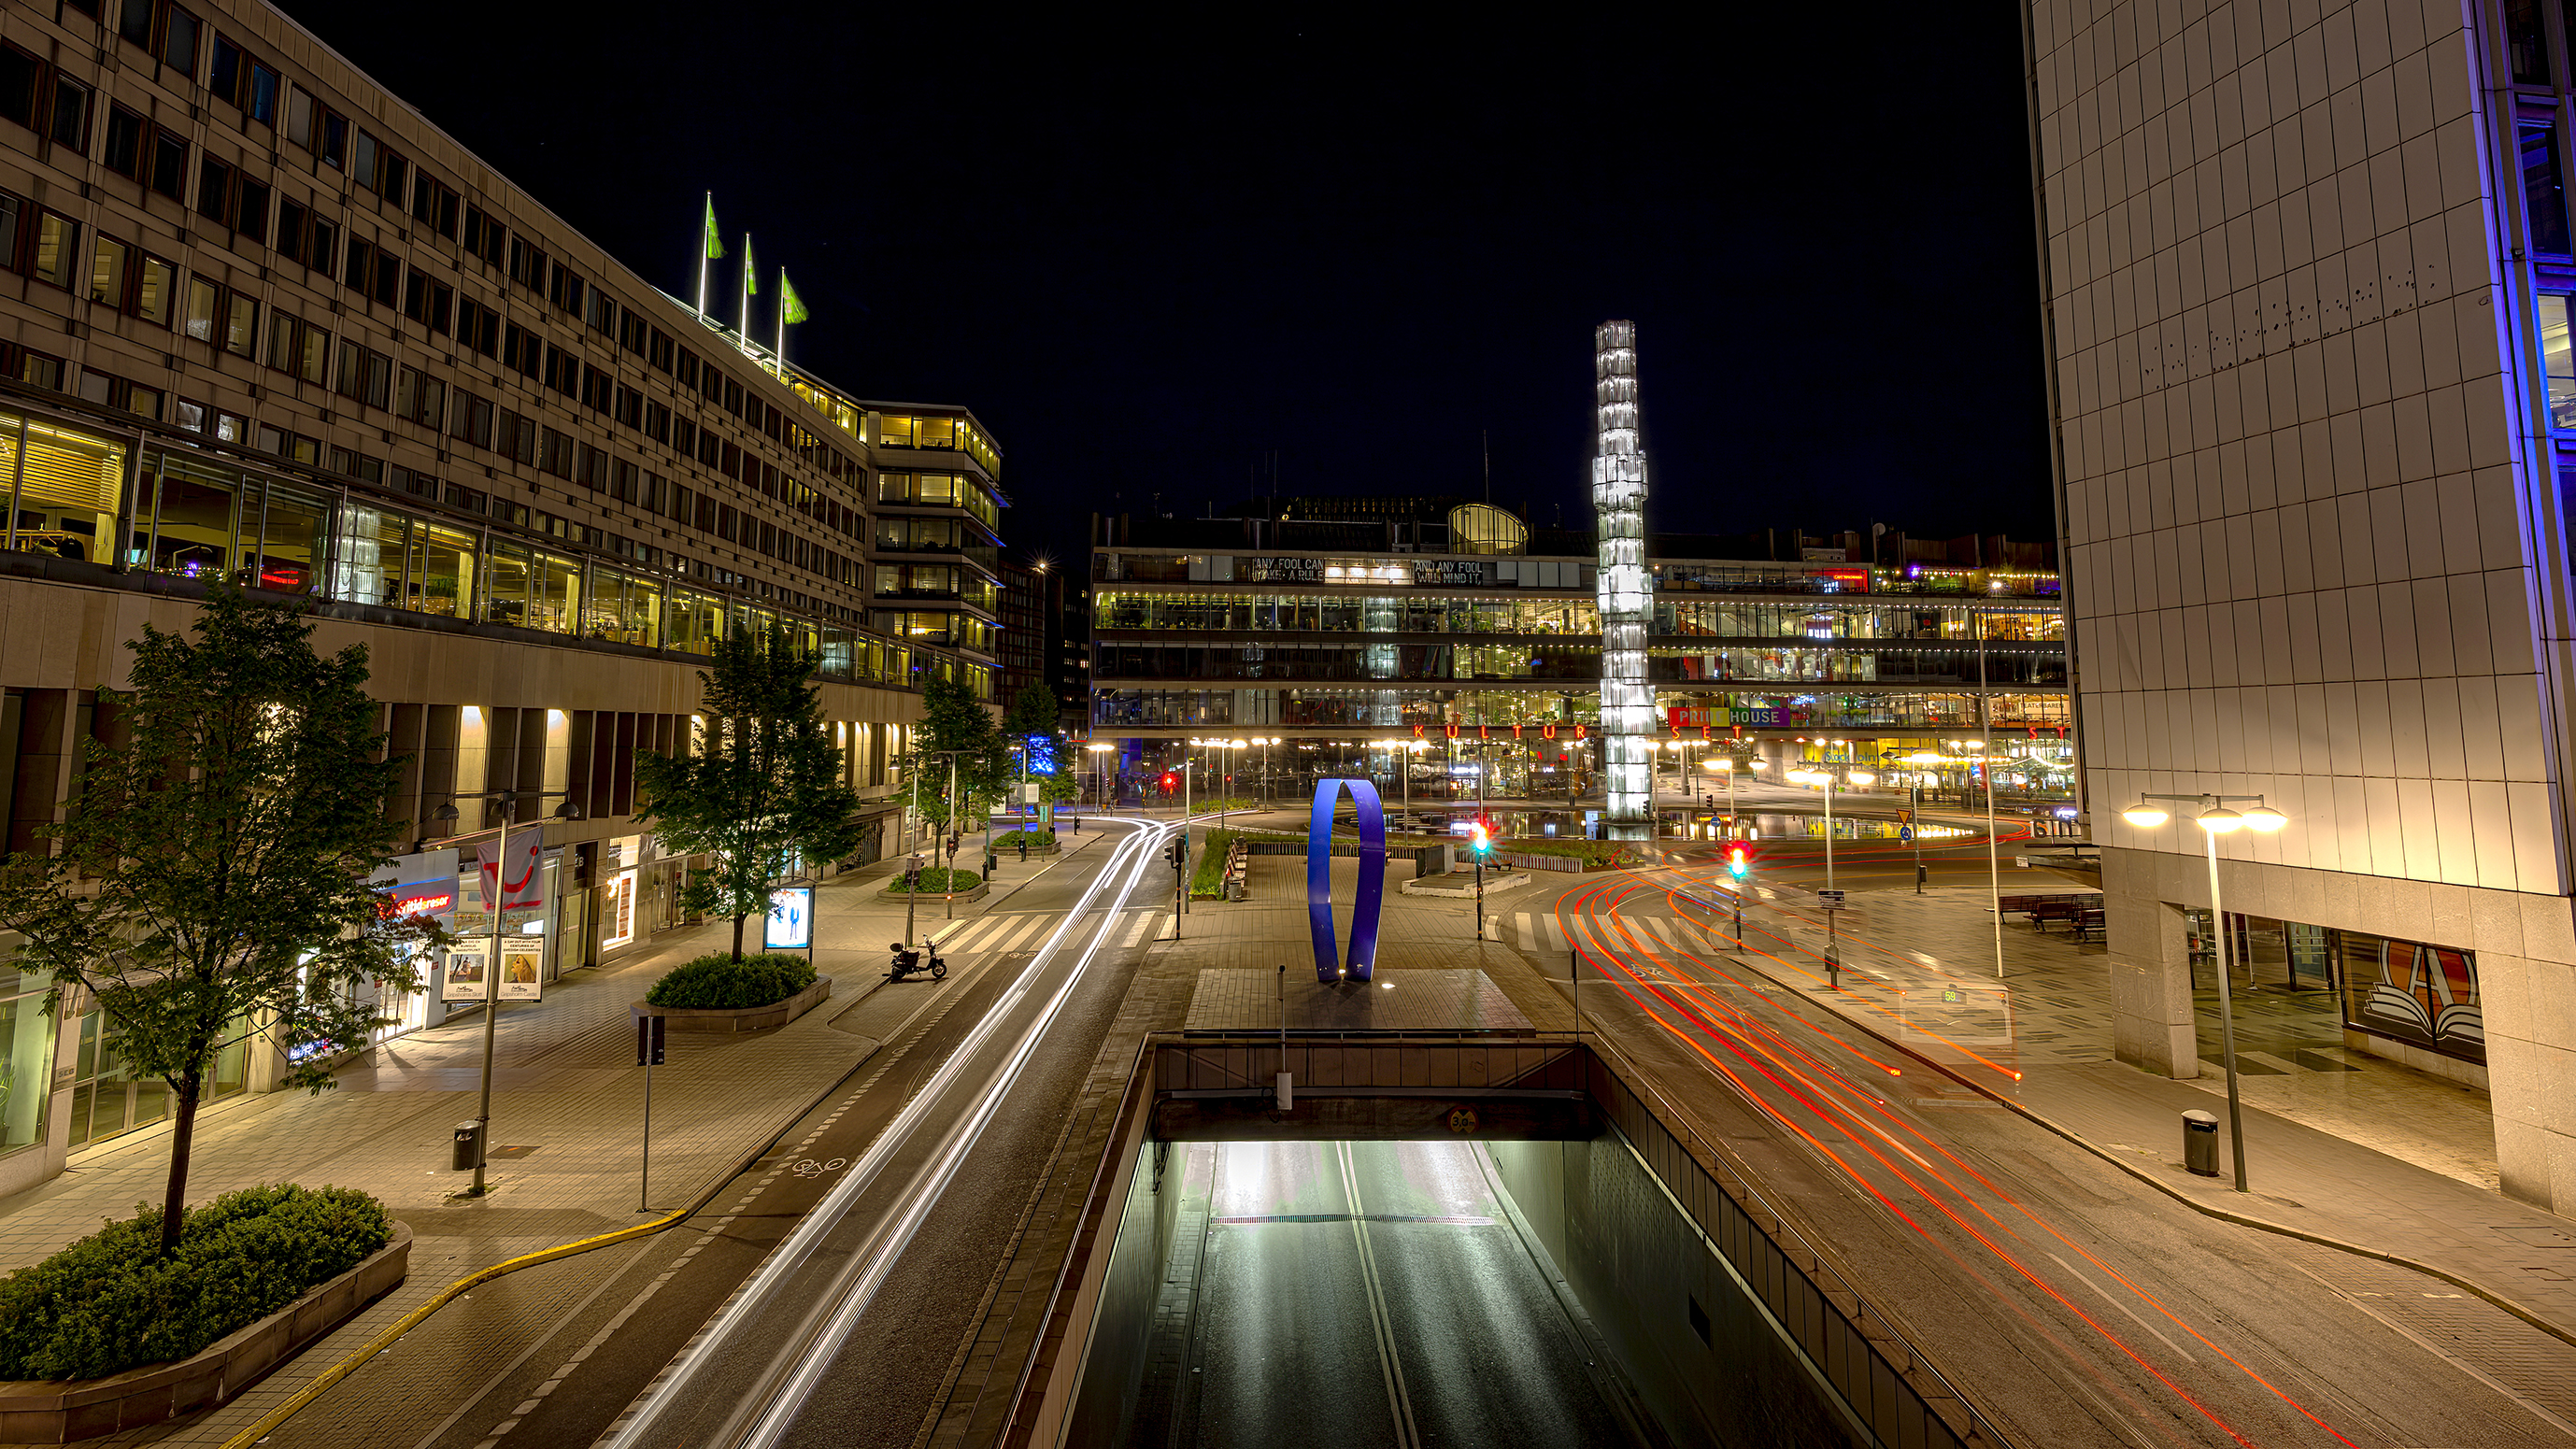 Night photography cityscapes Sweden Stockholm Sergels torg July 2012 02